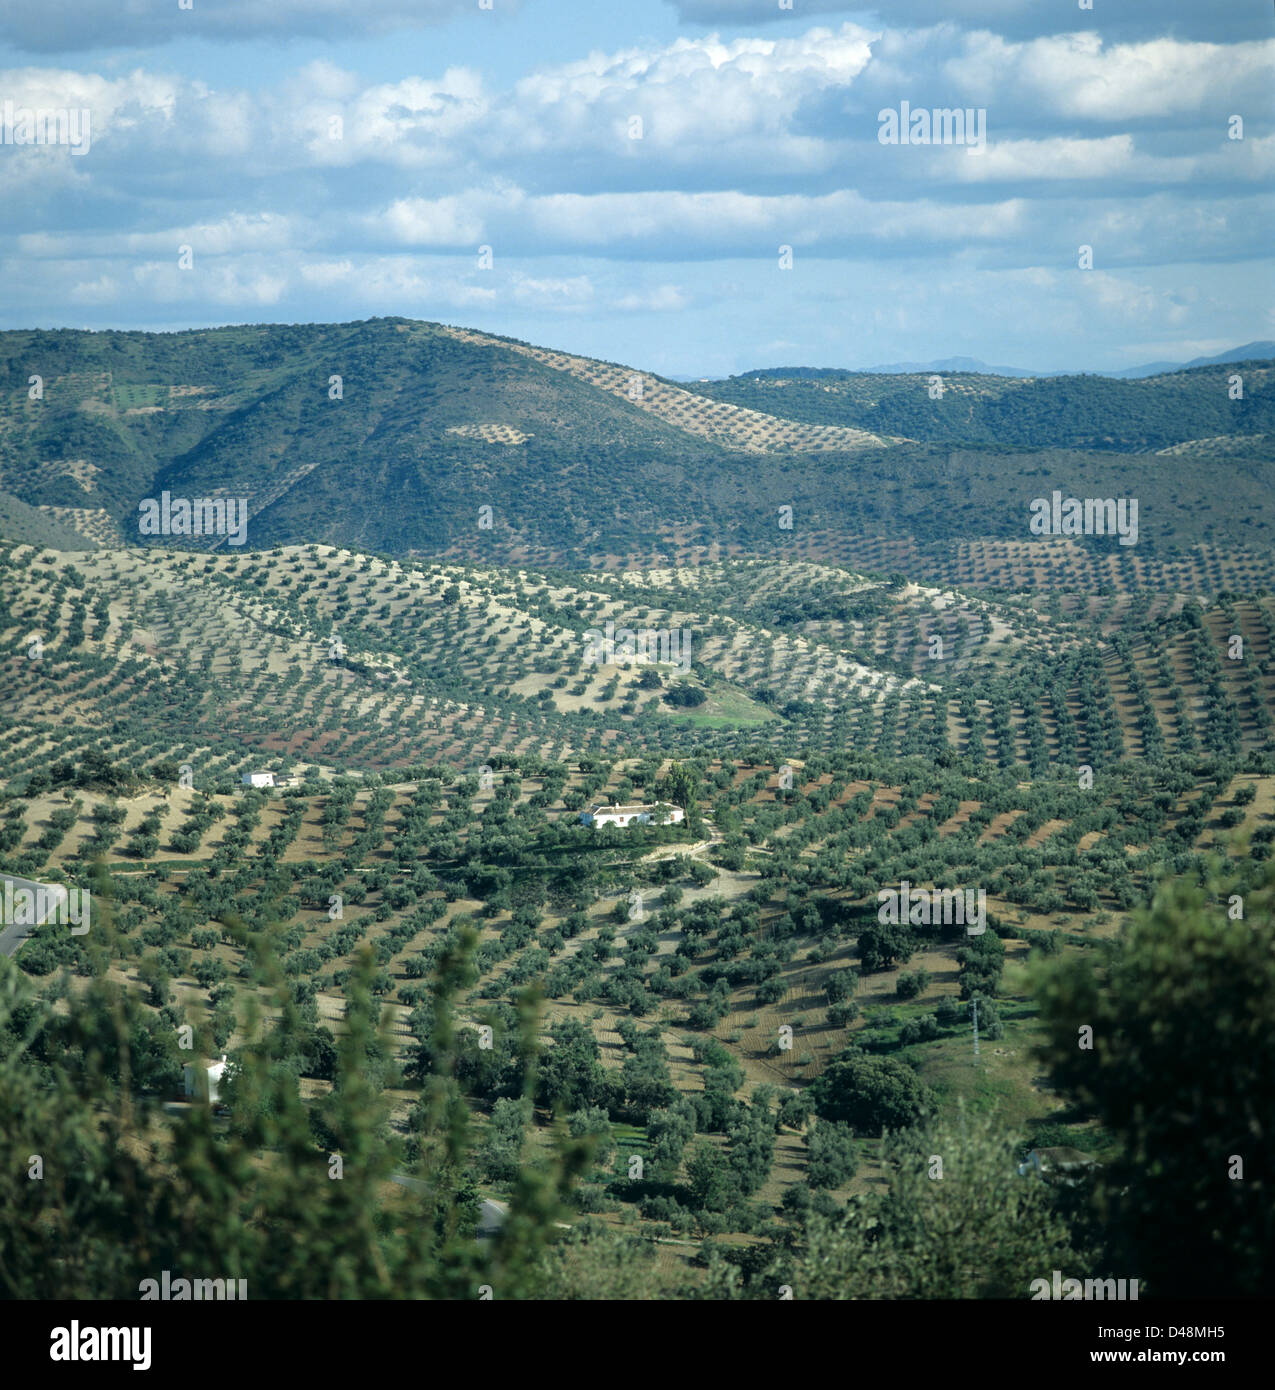 Amazing view of undulating hills with rows olive trees in farmland in Andalusia, Spain Stock Photo